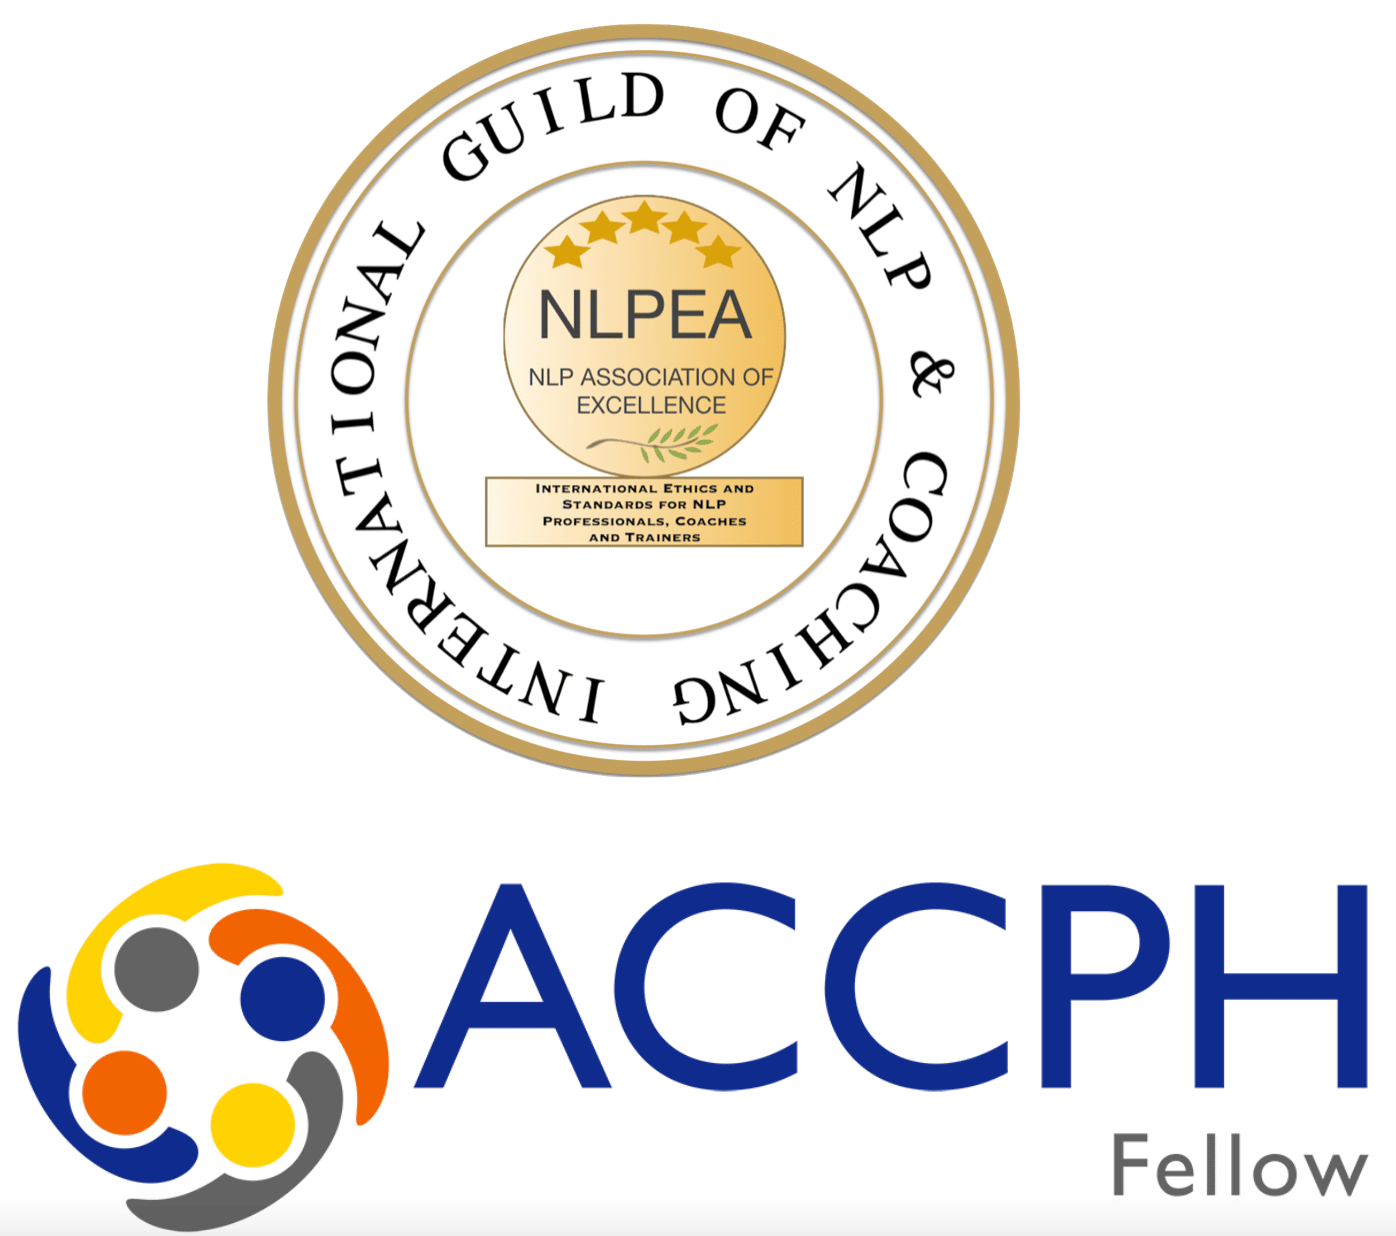 AACPH Fellow & NLPEA master trainer